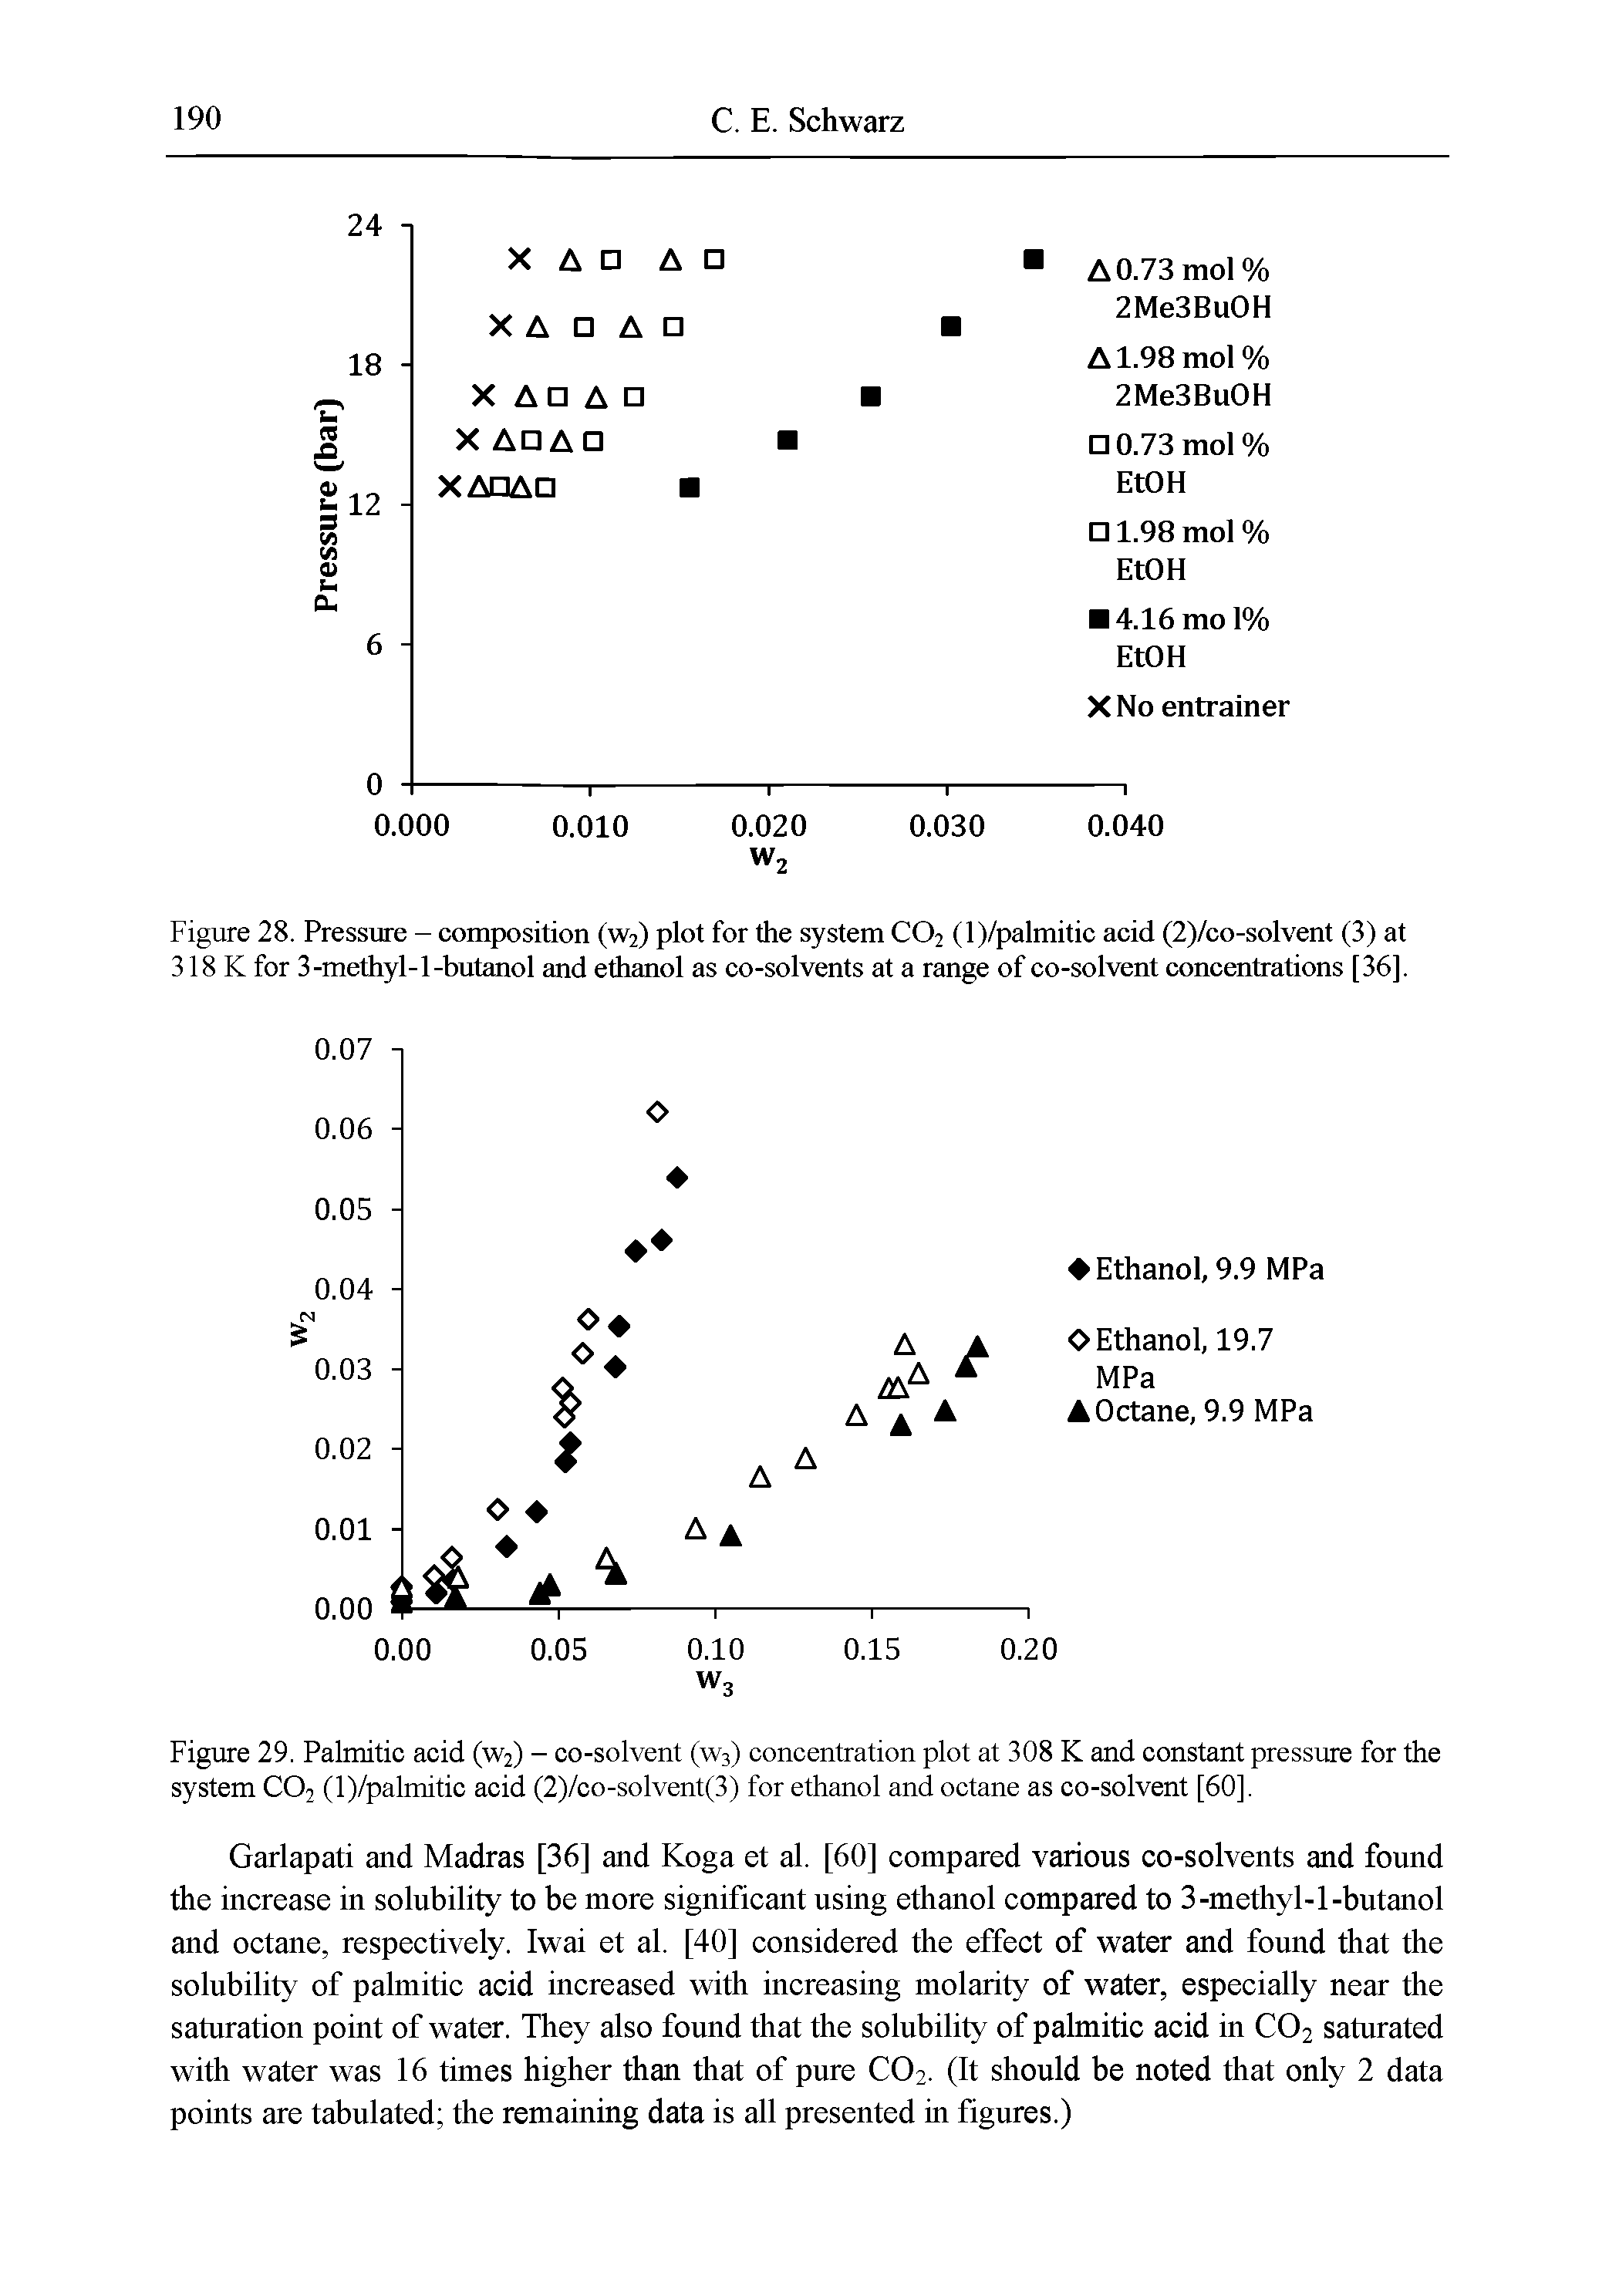 Figure 29. Palmitic acid (W2) - co-solvent (W3) concentration plot at 308 K and constant pressure for the system CO2 (l)/pahnitic acid (2)/co-solvent(3) for ethanol and octane as co-solvent [60].